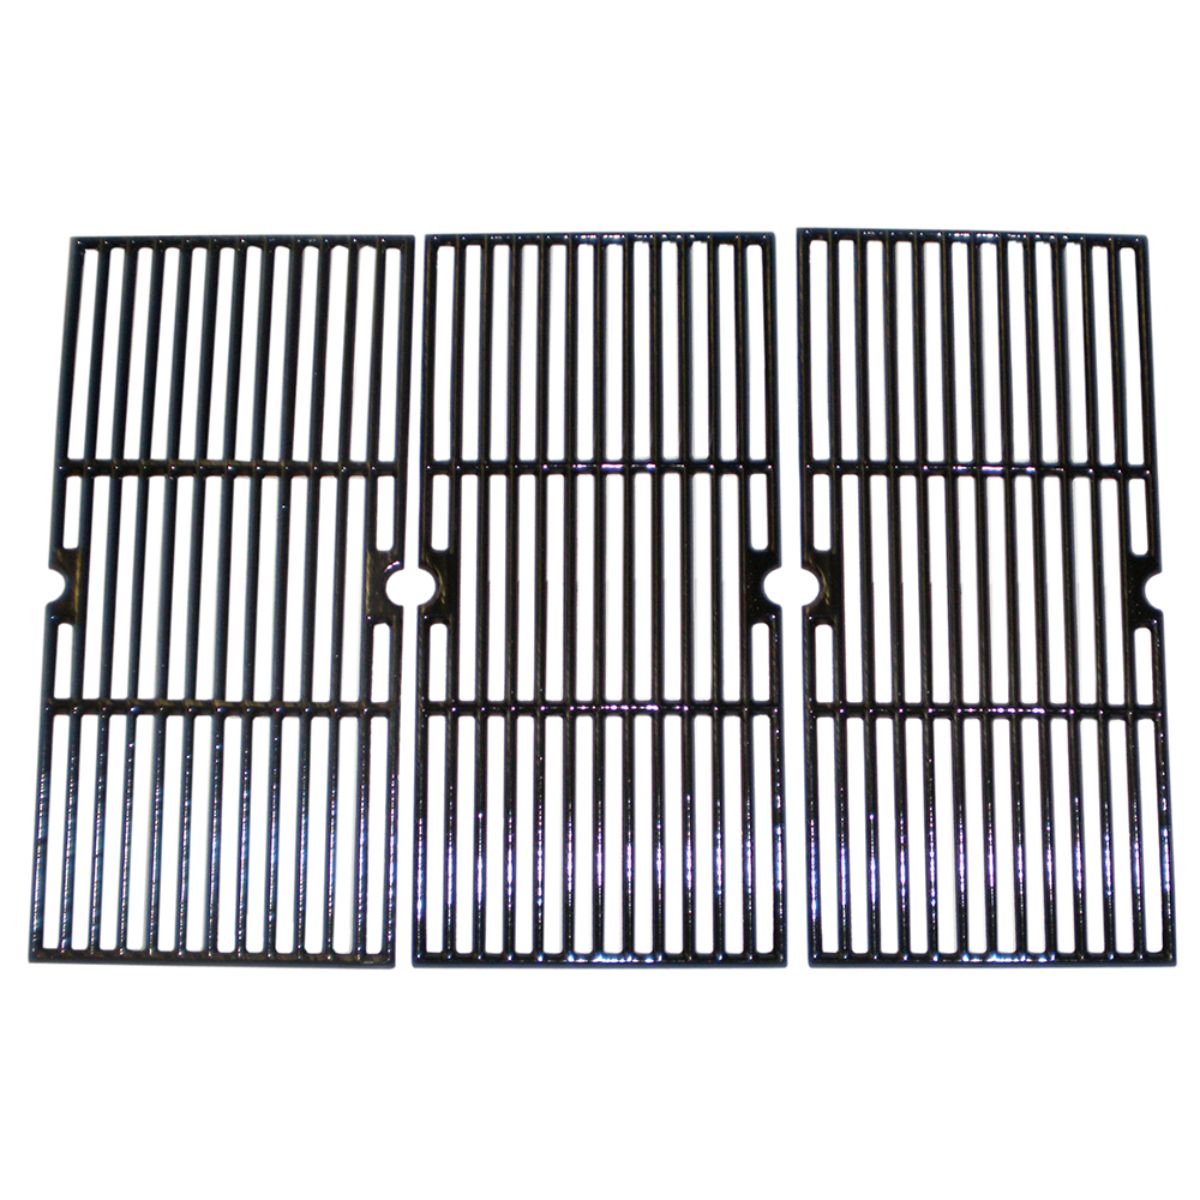 Gloss cast iron cooking grid for Brinkmann brand gas grills